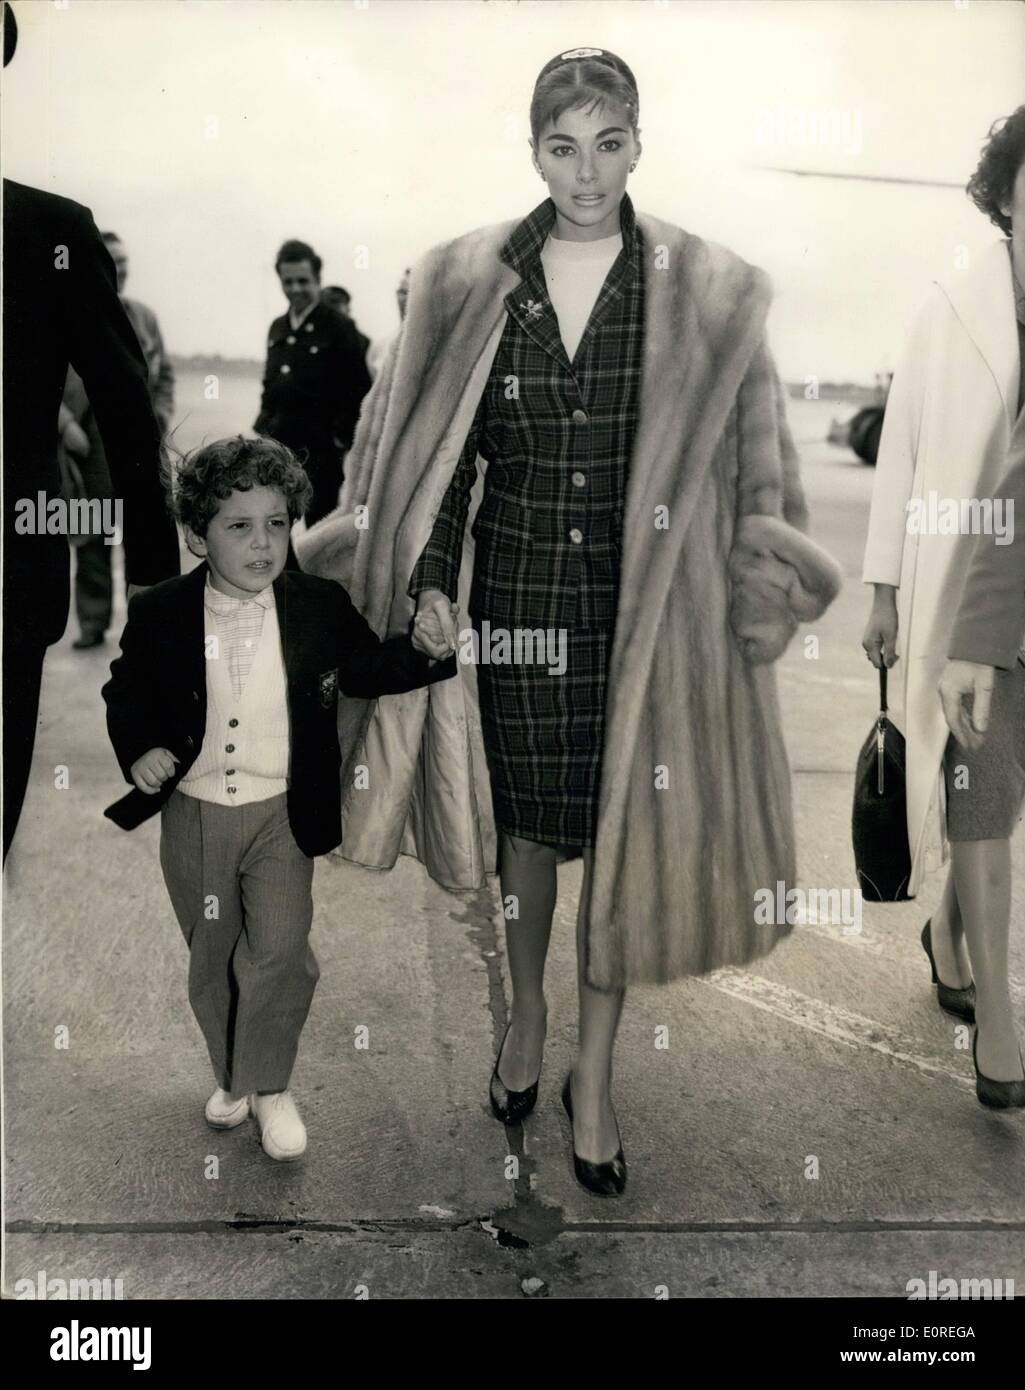 Apr. 04, 1959 - Pier Angeli brigs her son to London defiance of America court order. Actress Pier Angeli arrived at London Airport this afternoon with her son Perry. She is aid to have brought the boy to London from America in defiance of an emergency court order restraining her from taking him out of the United States because of divorce proceedings between Pier and husband singer Vic Damone .Photo shoes Pier Angeli and her son Perry walking from the aircraft at London airport this afternoon. Stock Photo